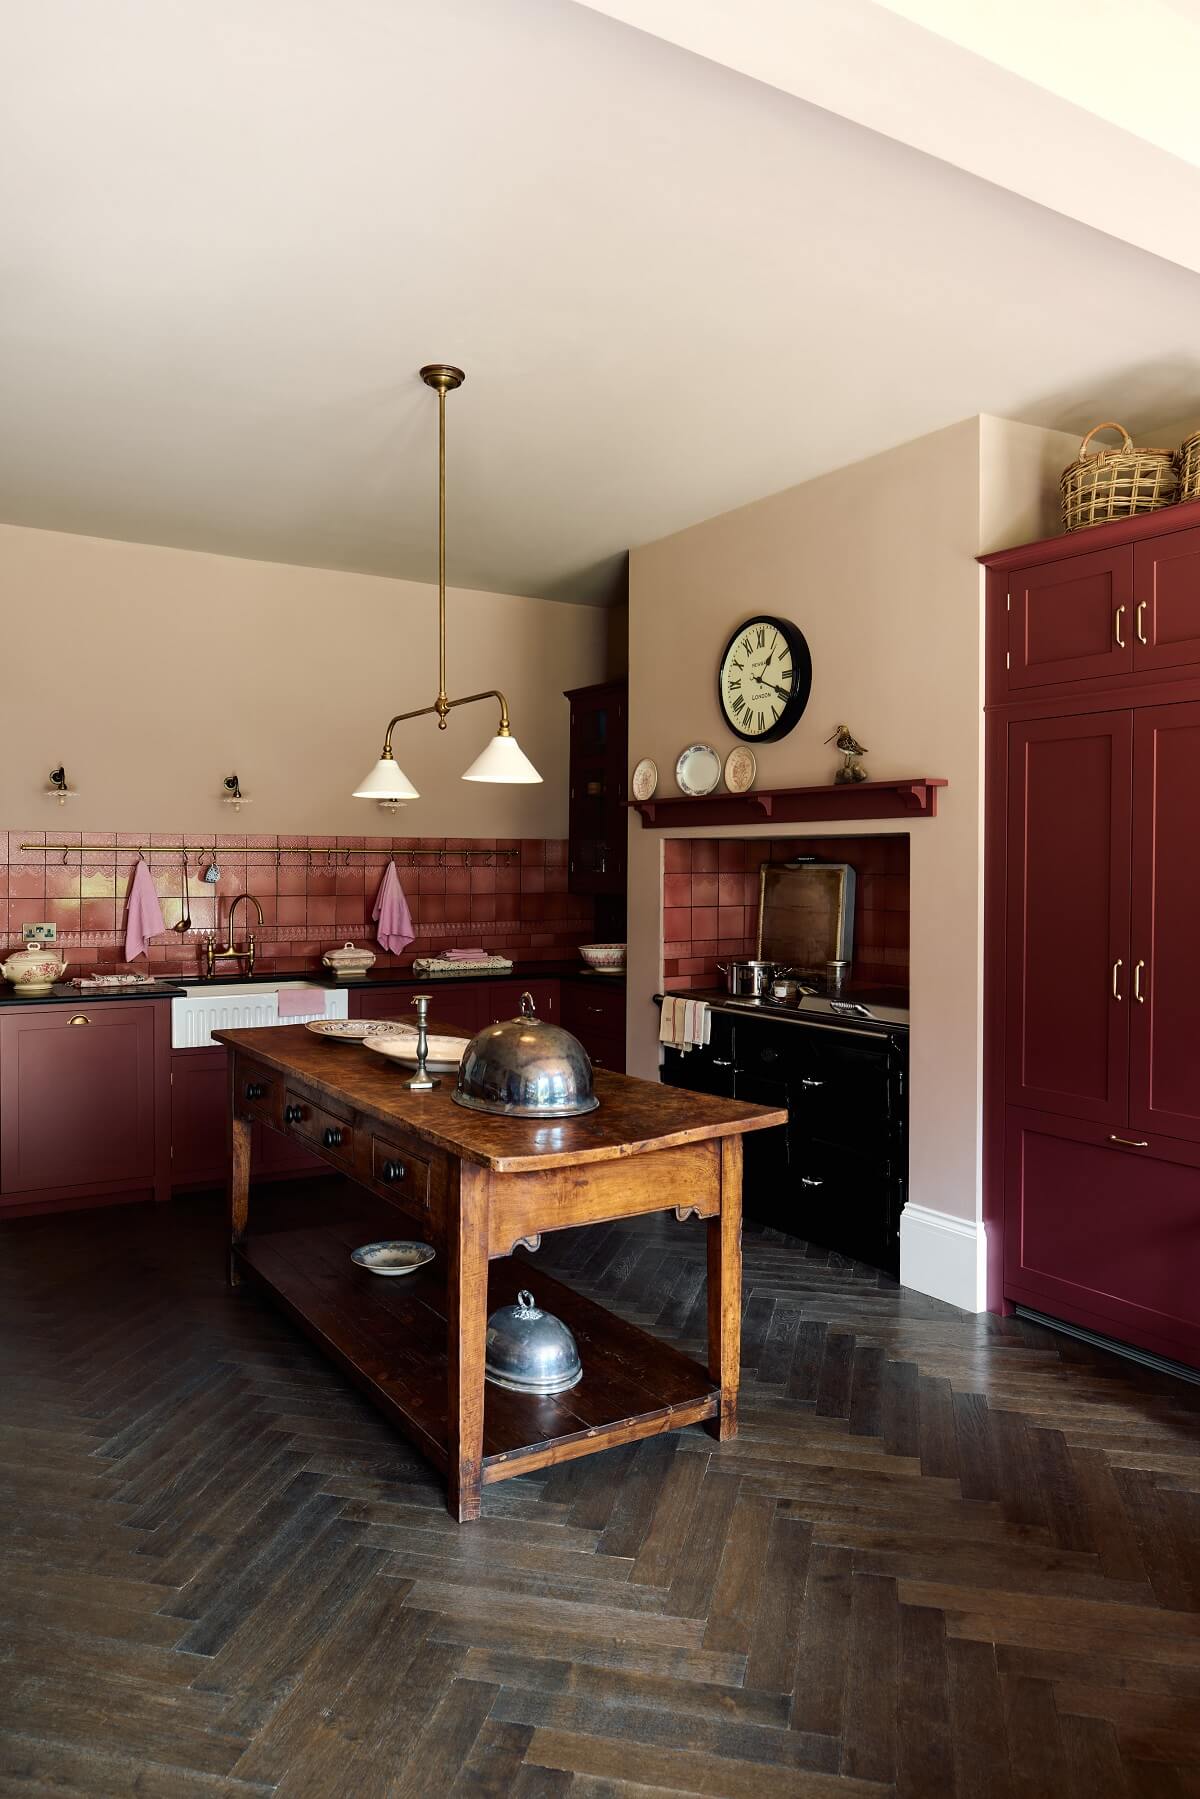 An English Country House Kitchen with Pink Tiles